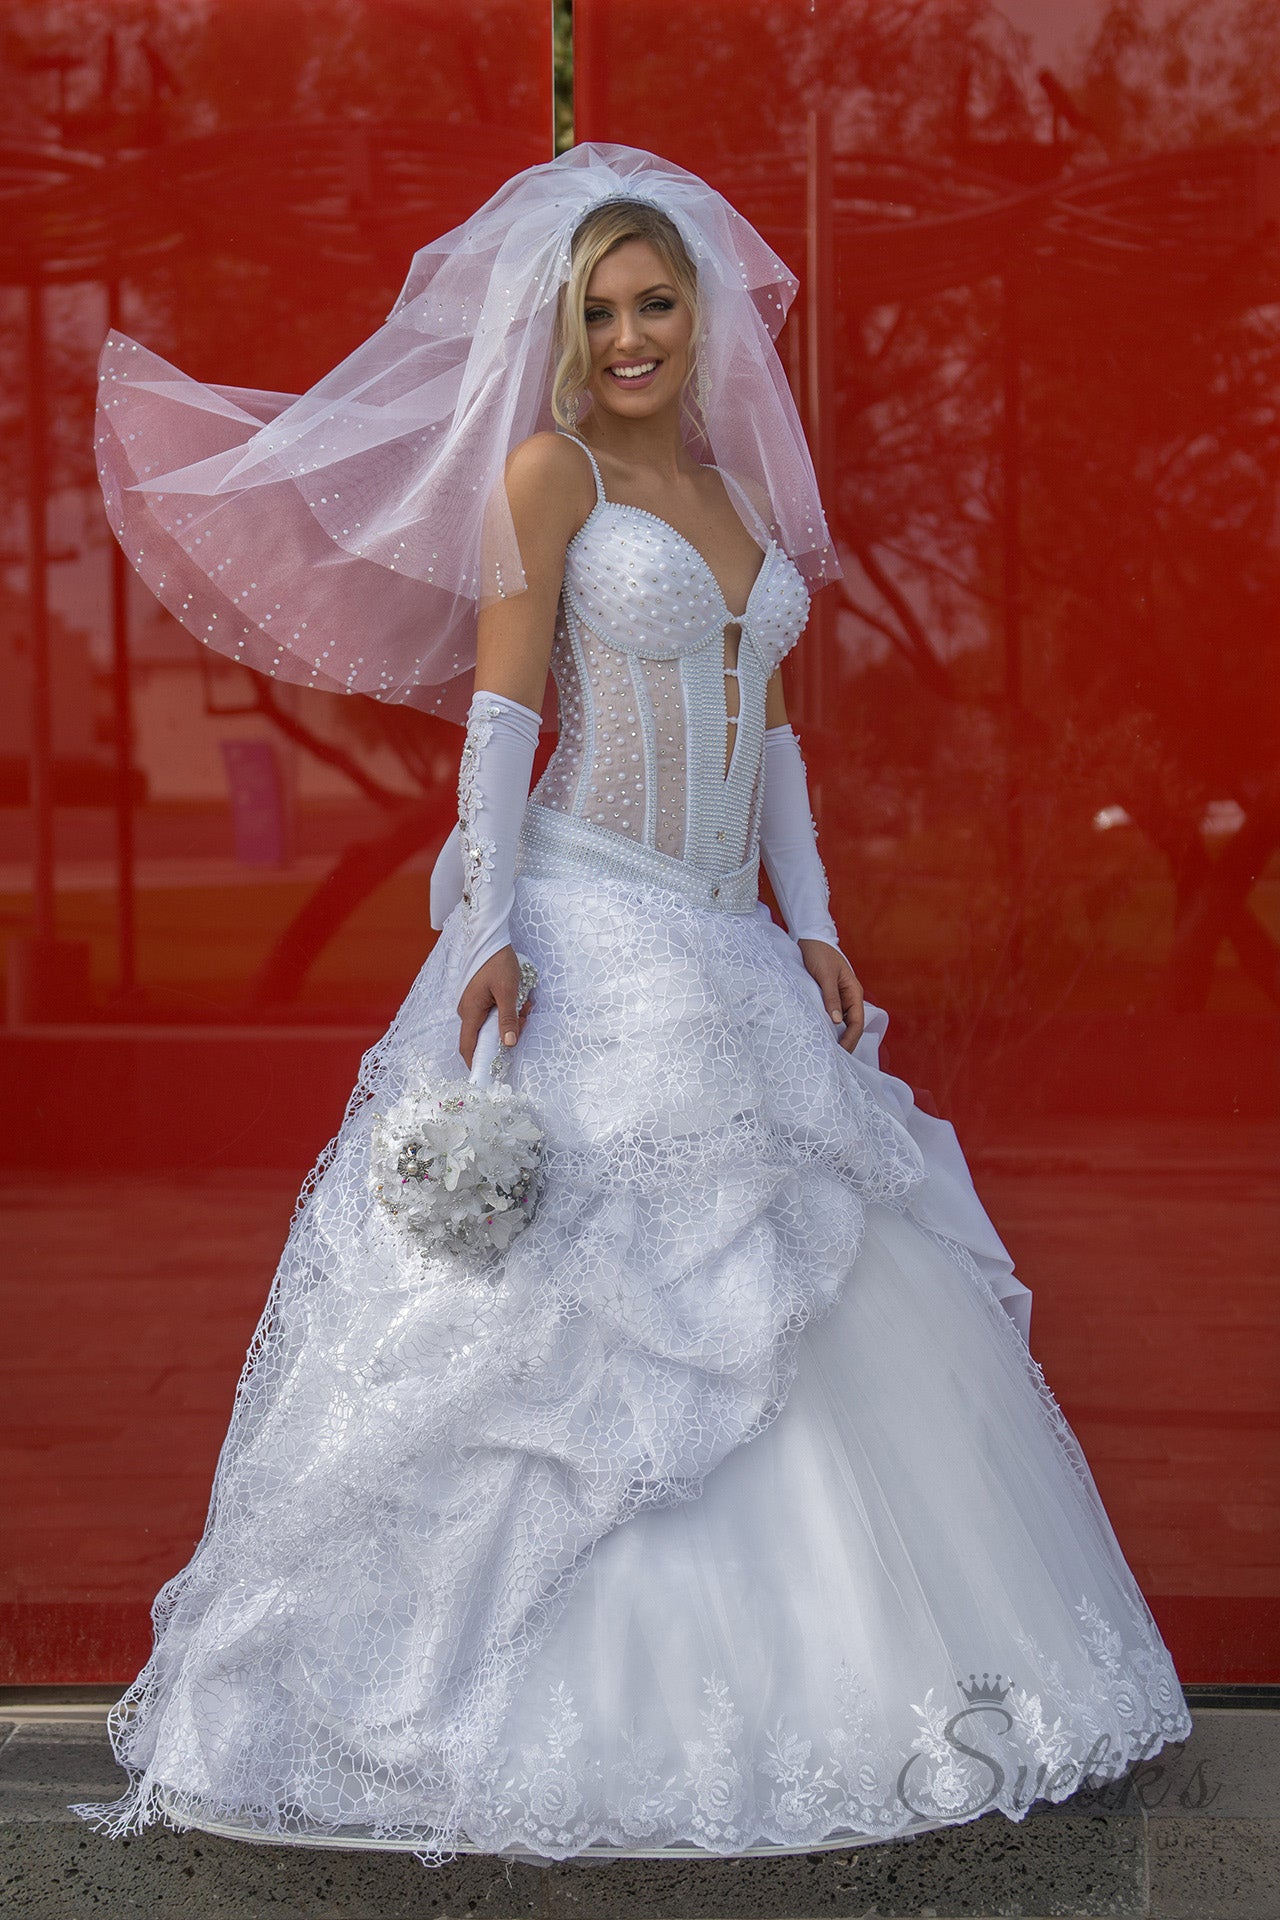 Brides Web 2 Sample -  In Stock in size  x-small/small (0-4)